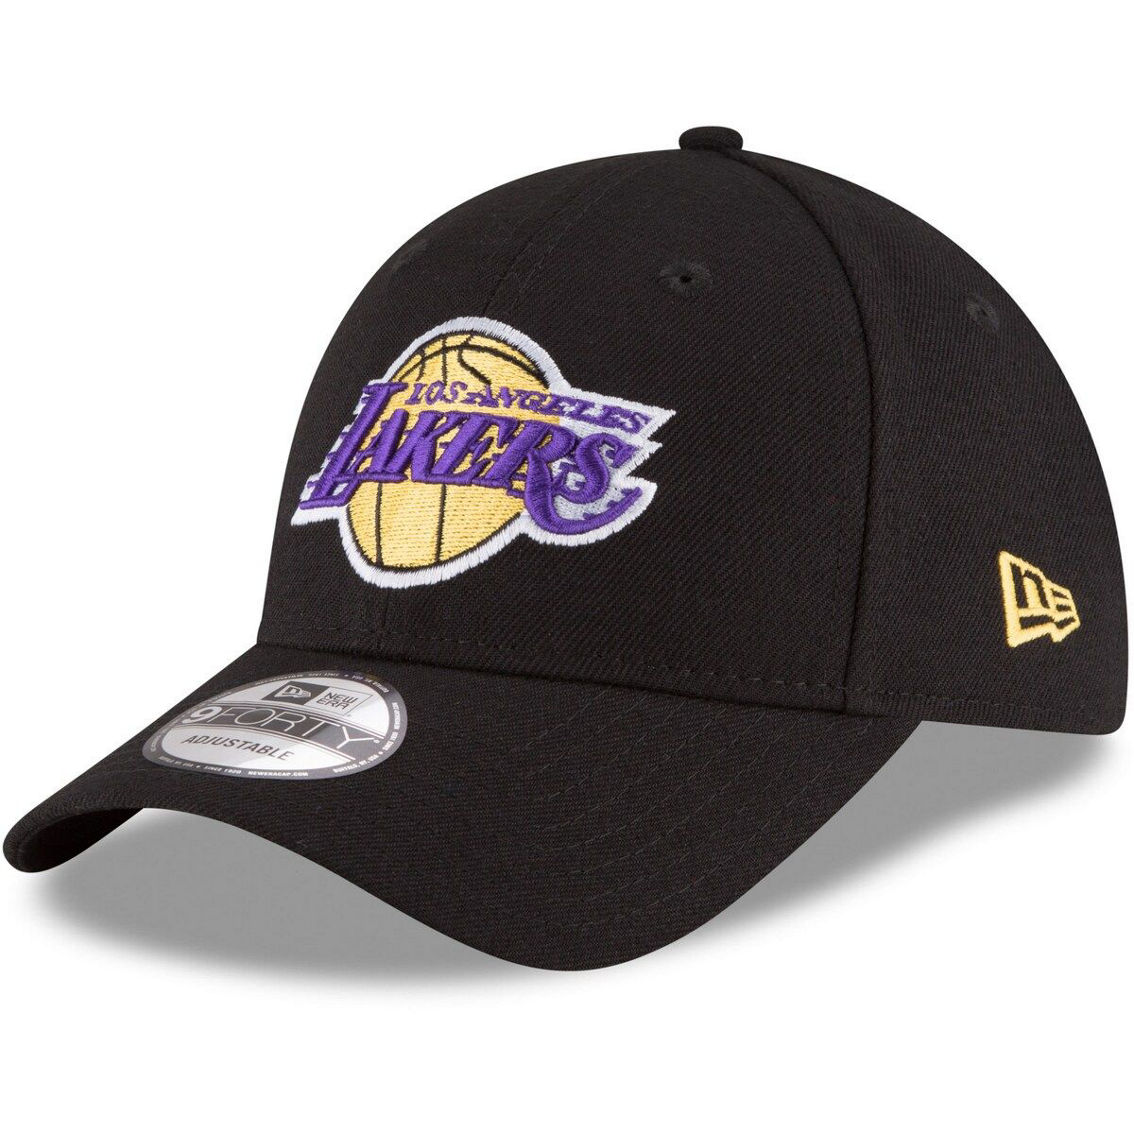 New Era Men's Black Los Angeles Lakers Official Team Color The League 9FORTY Adjustable Hat - Image 2 of 4